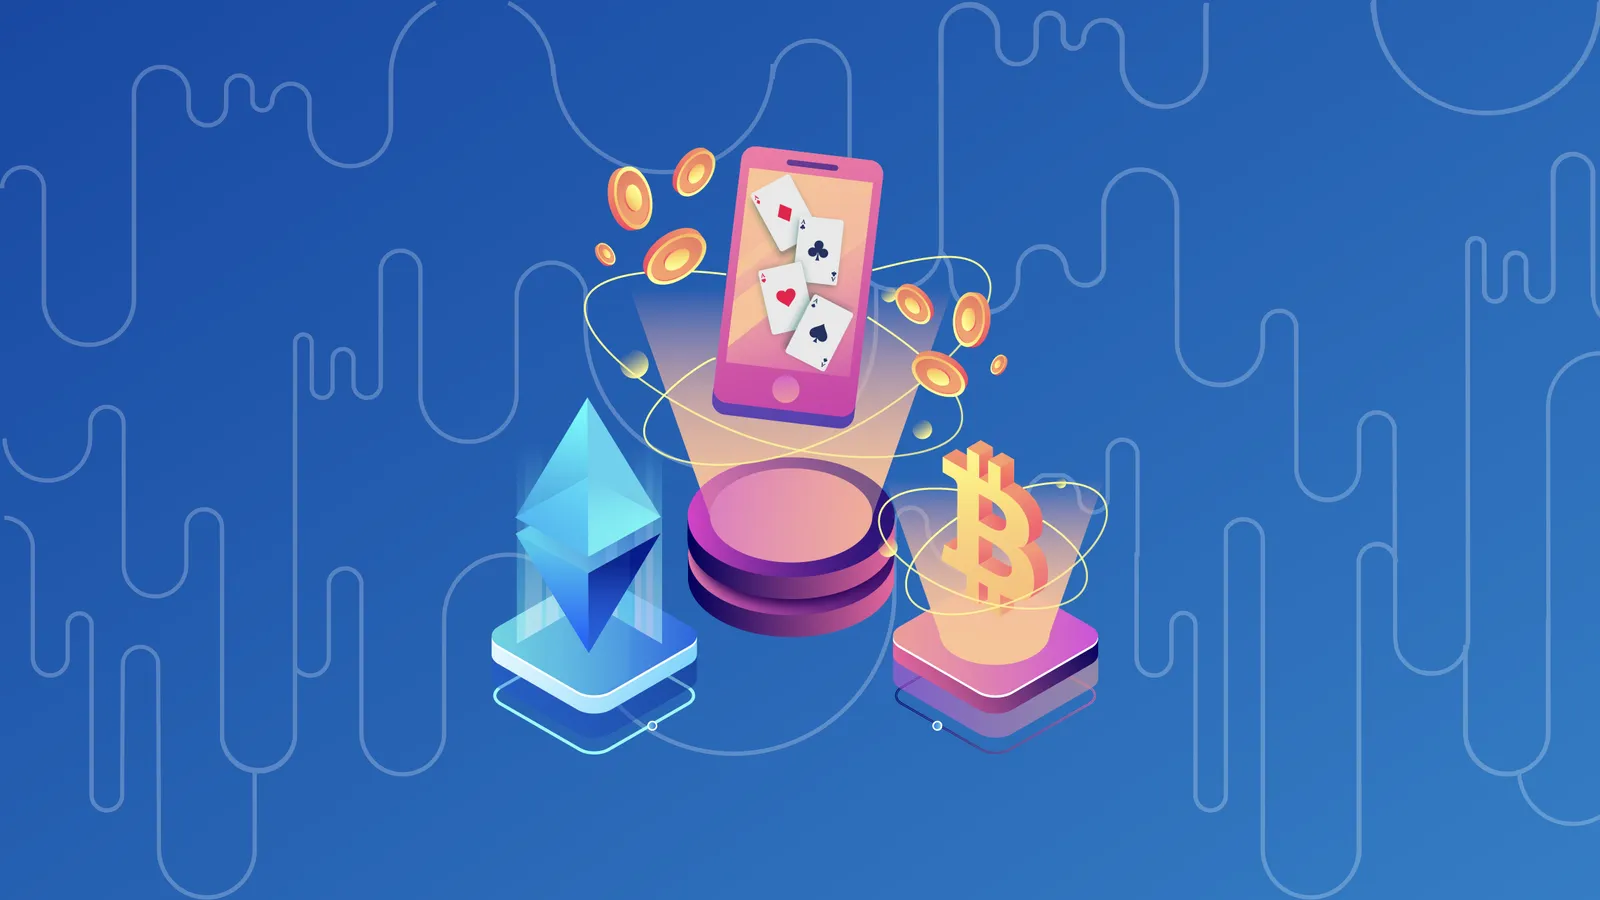 Bling Financial makes mobile games with crypto rewards. Image: Decrypt